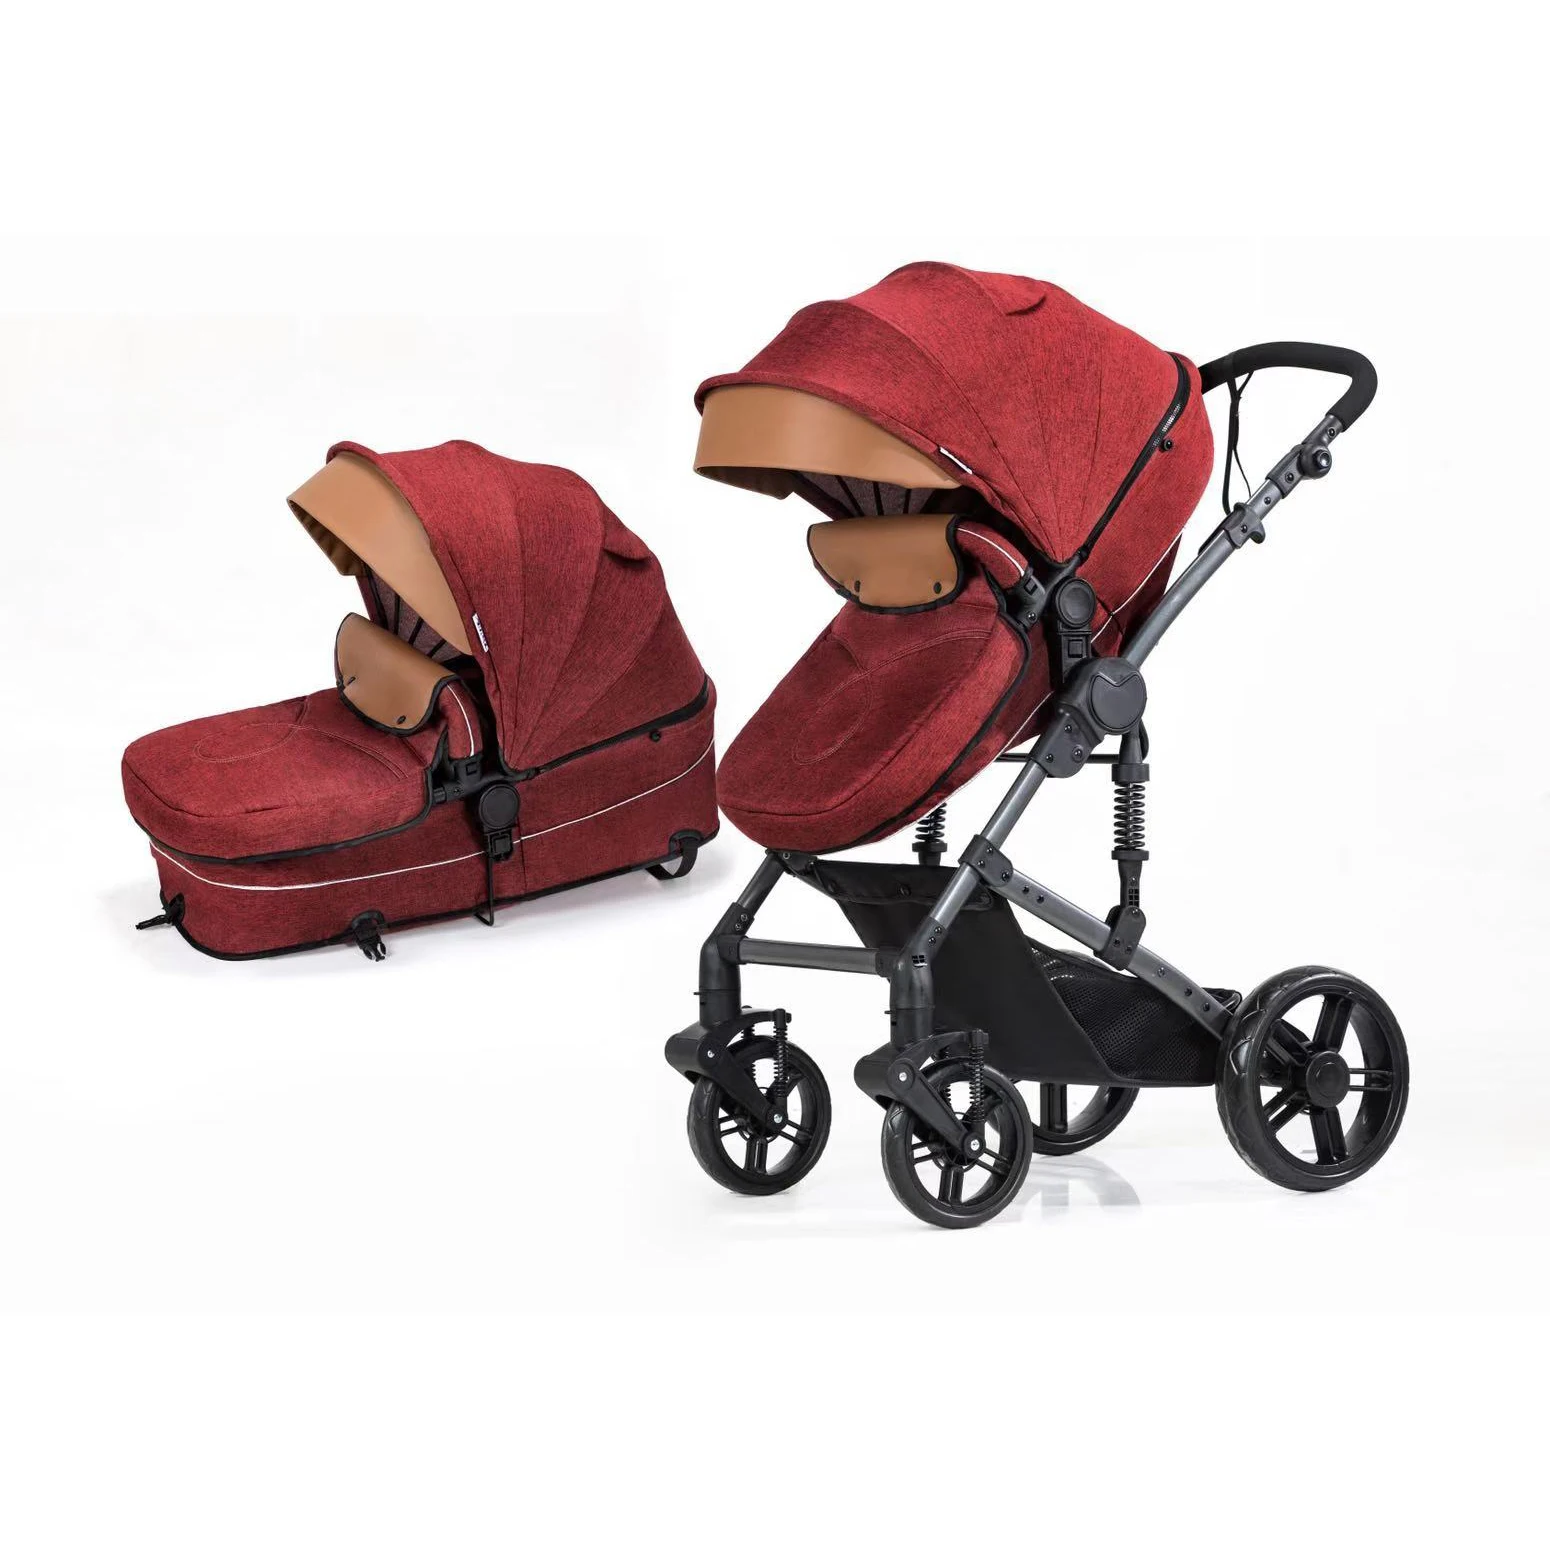 

Luxury Baby Stroller 2 in 1 High Landscape Baby Prams For Newborns Travel System Baby Trolley Walker Foldable Baby Car Carriage